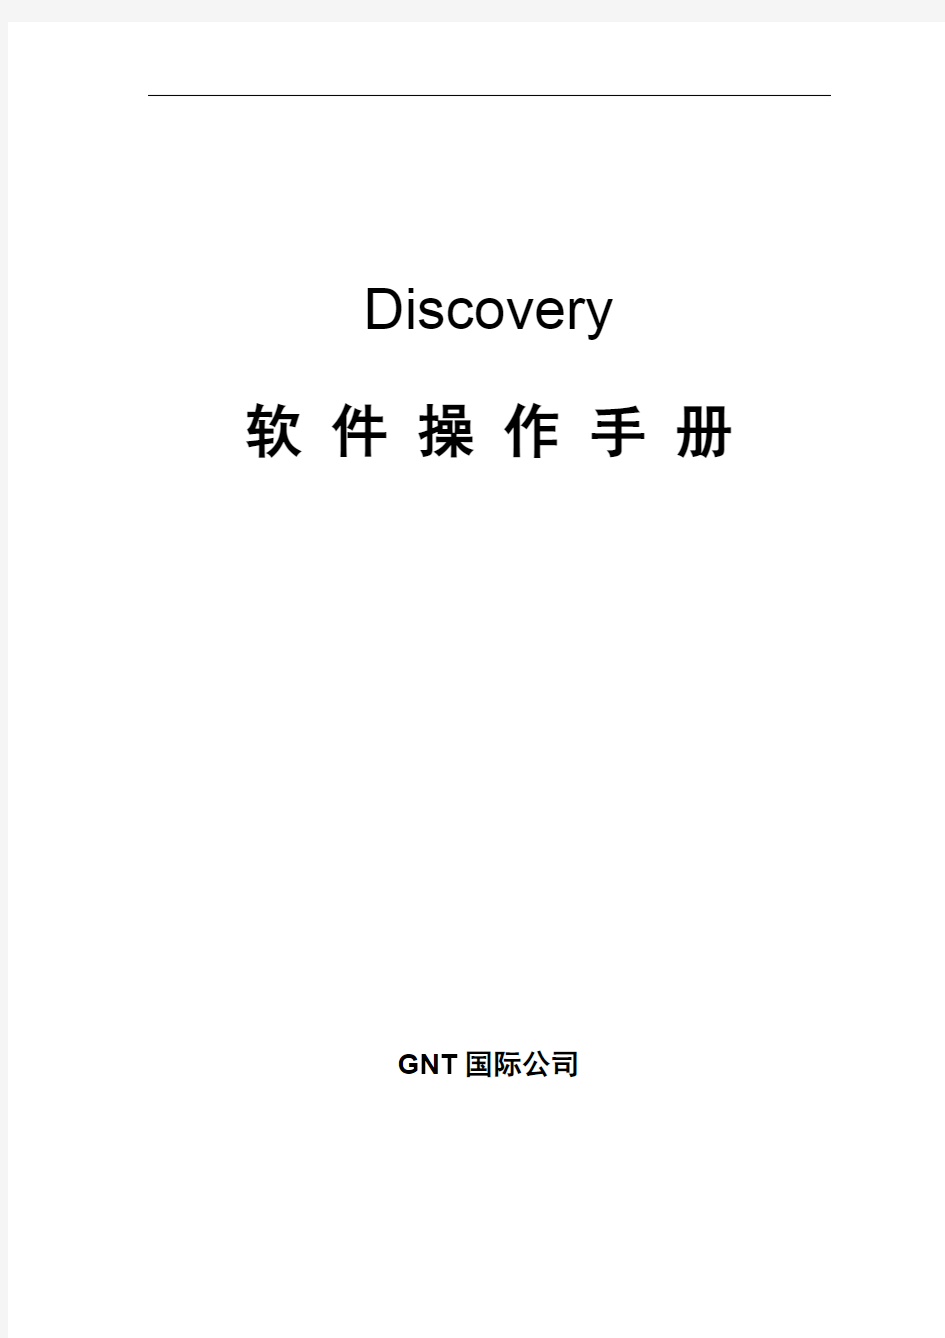 Discovery操作手册全.